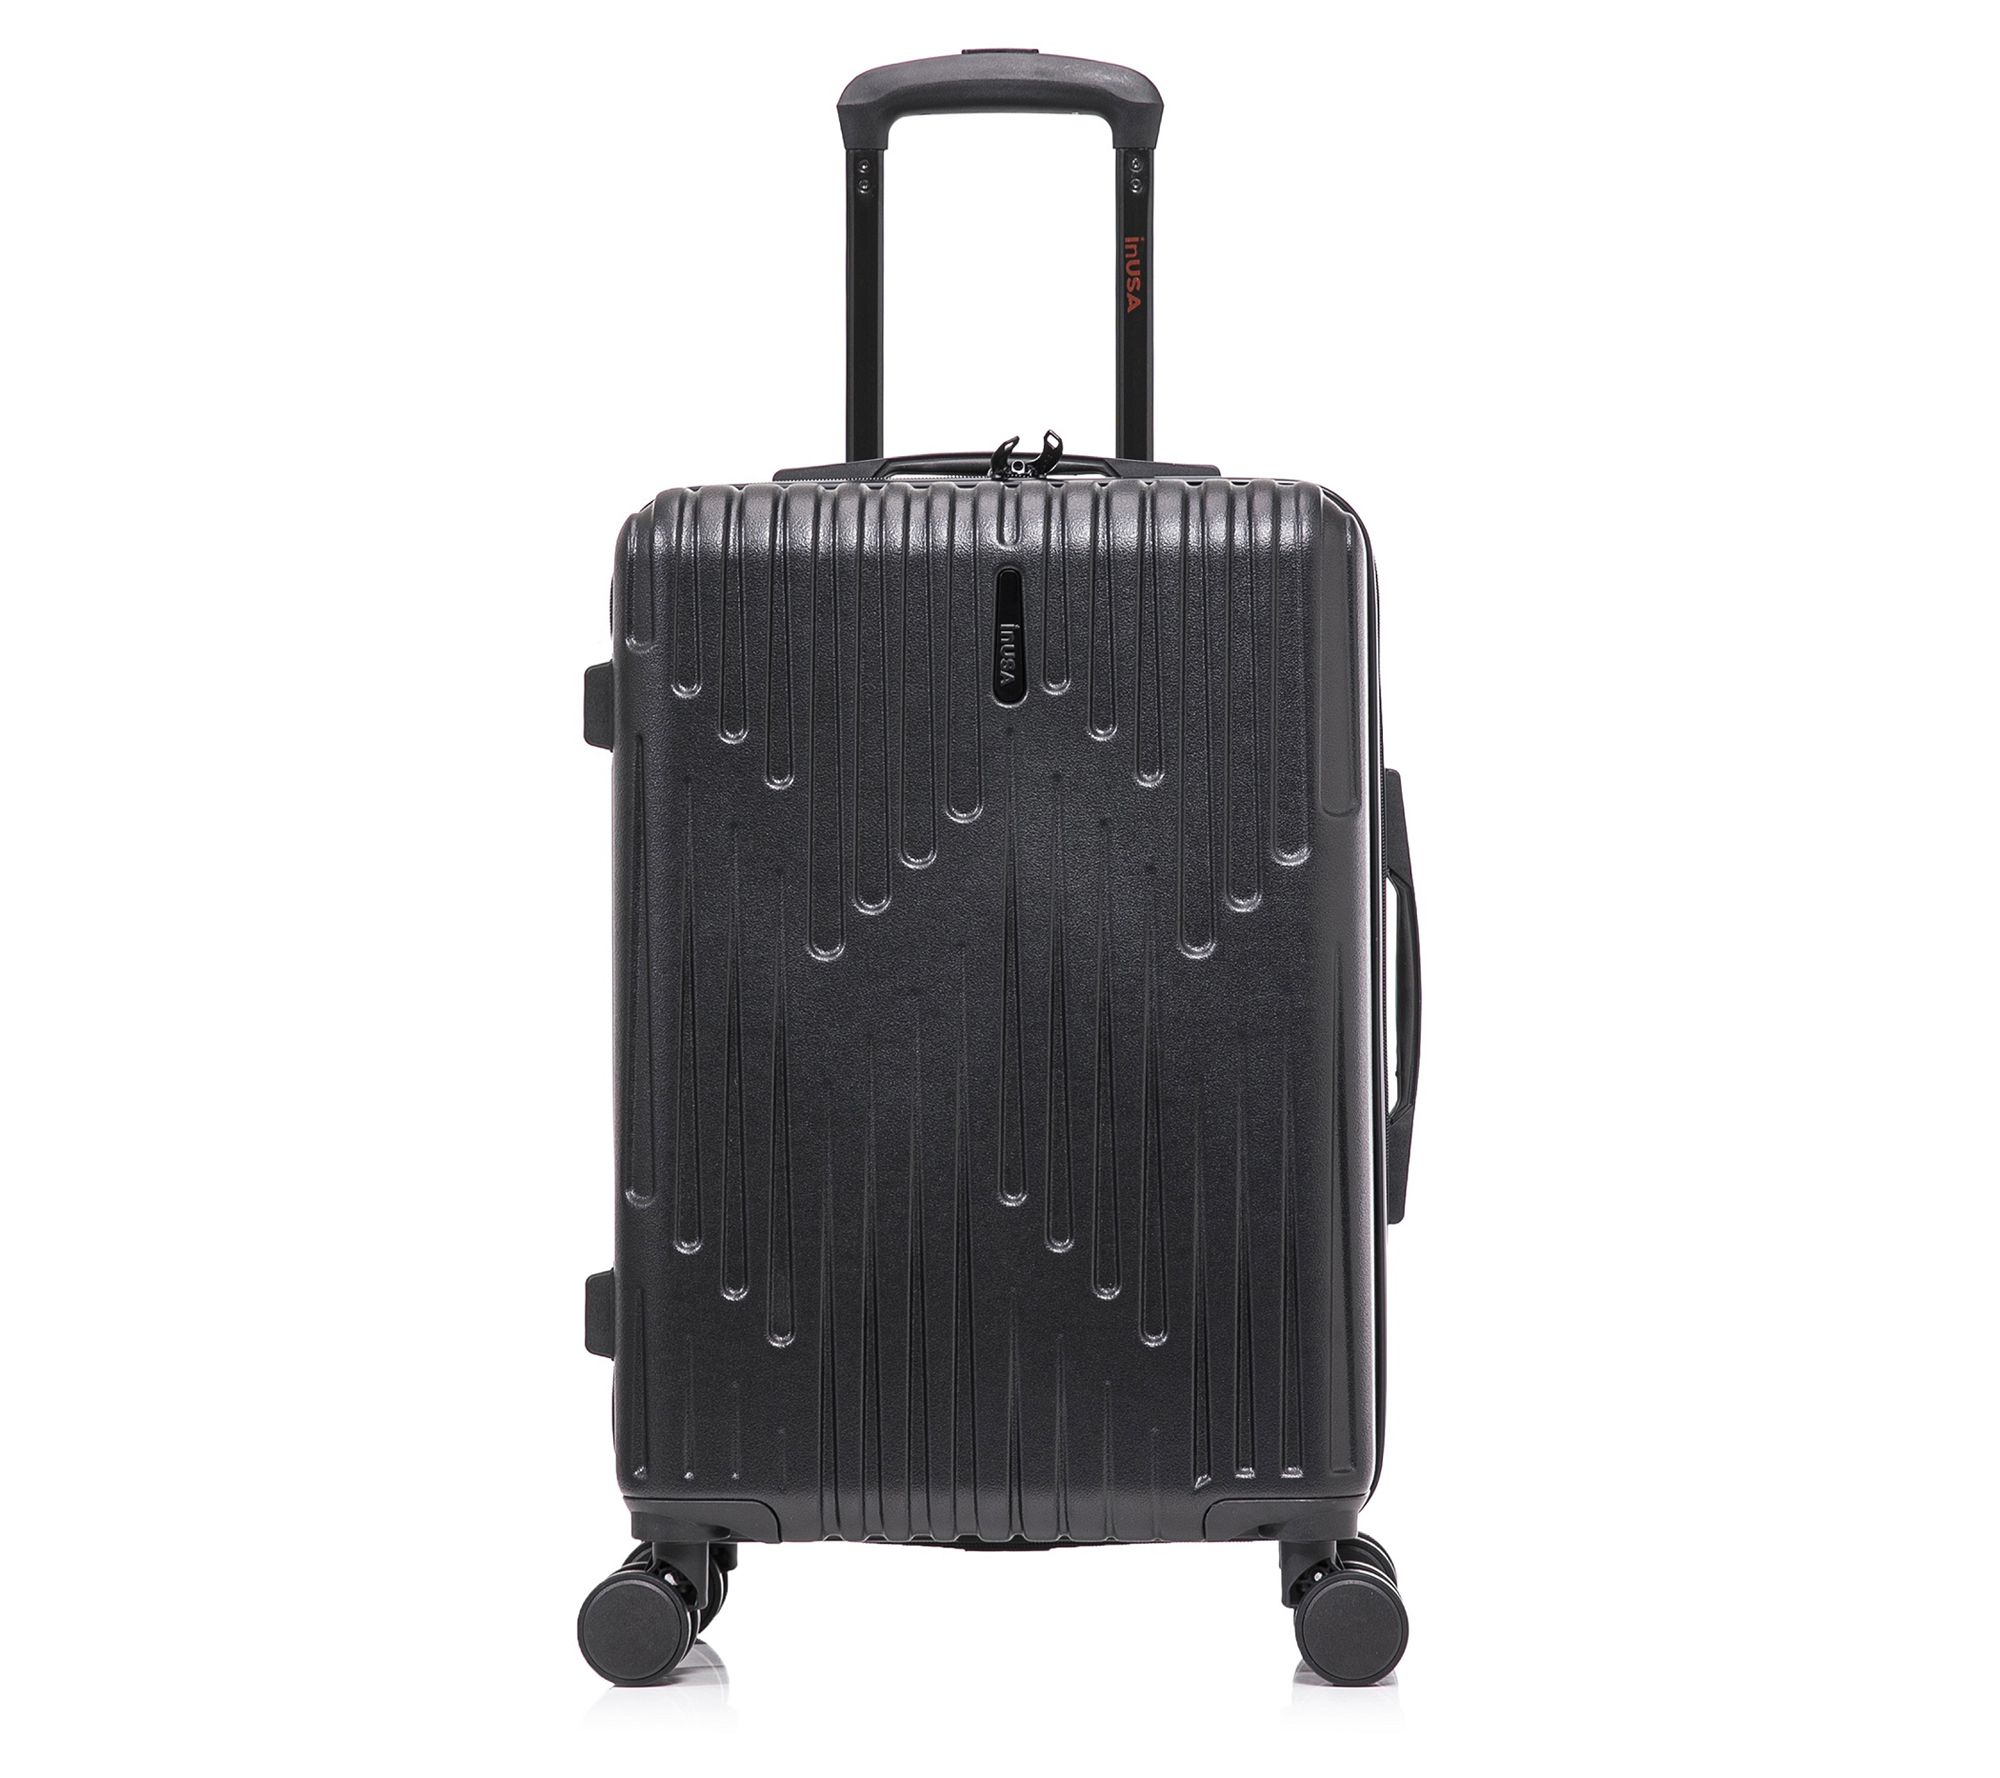 Carry-On Luggage & Carry-On Suitcases